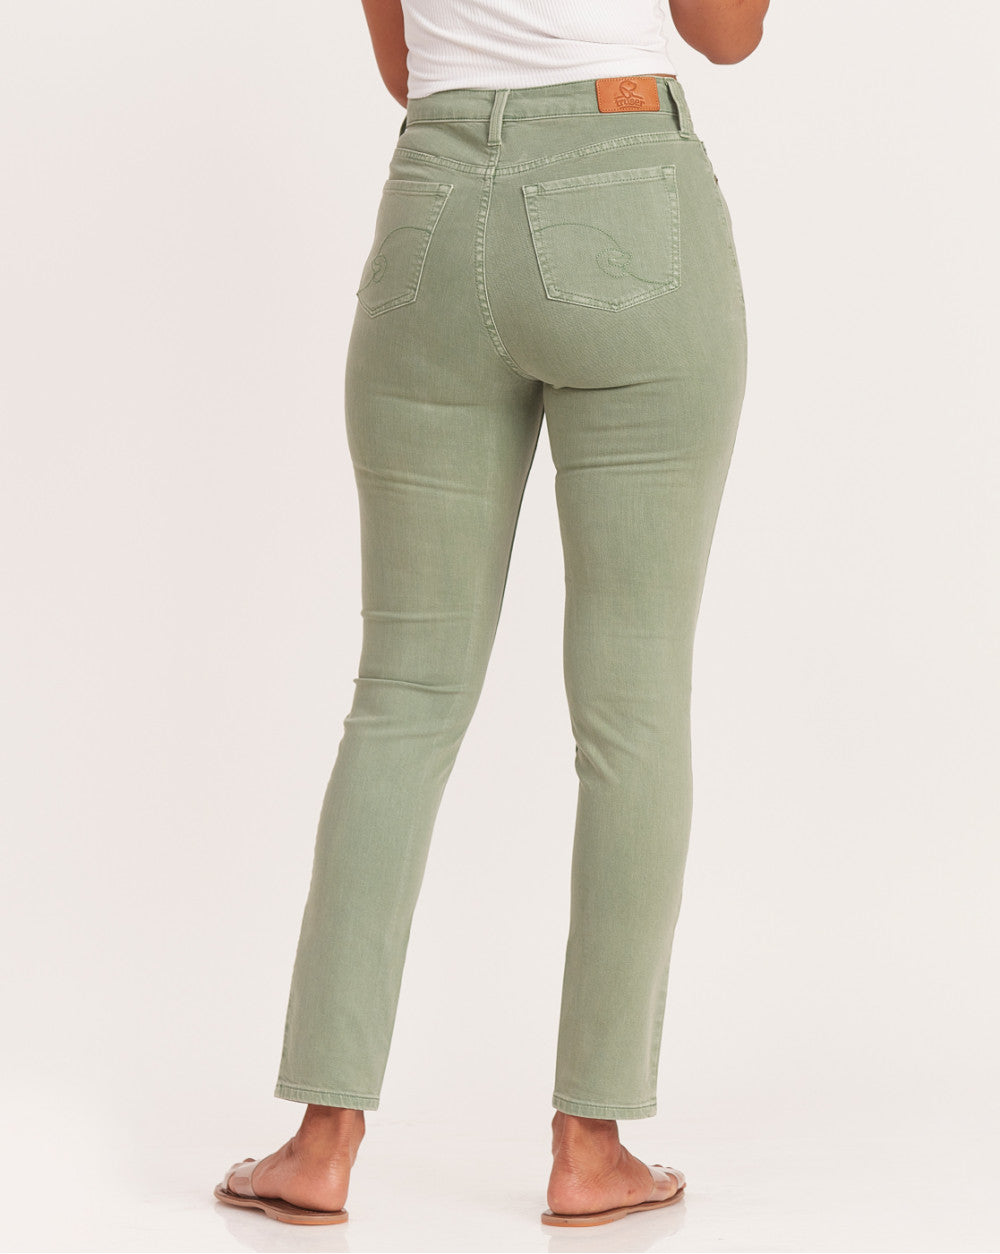 Skinny Fit High Waist Colored Jeans - Washed Jade